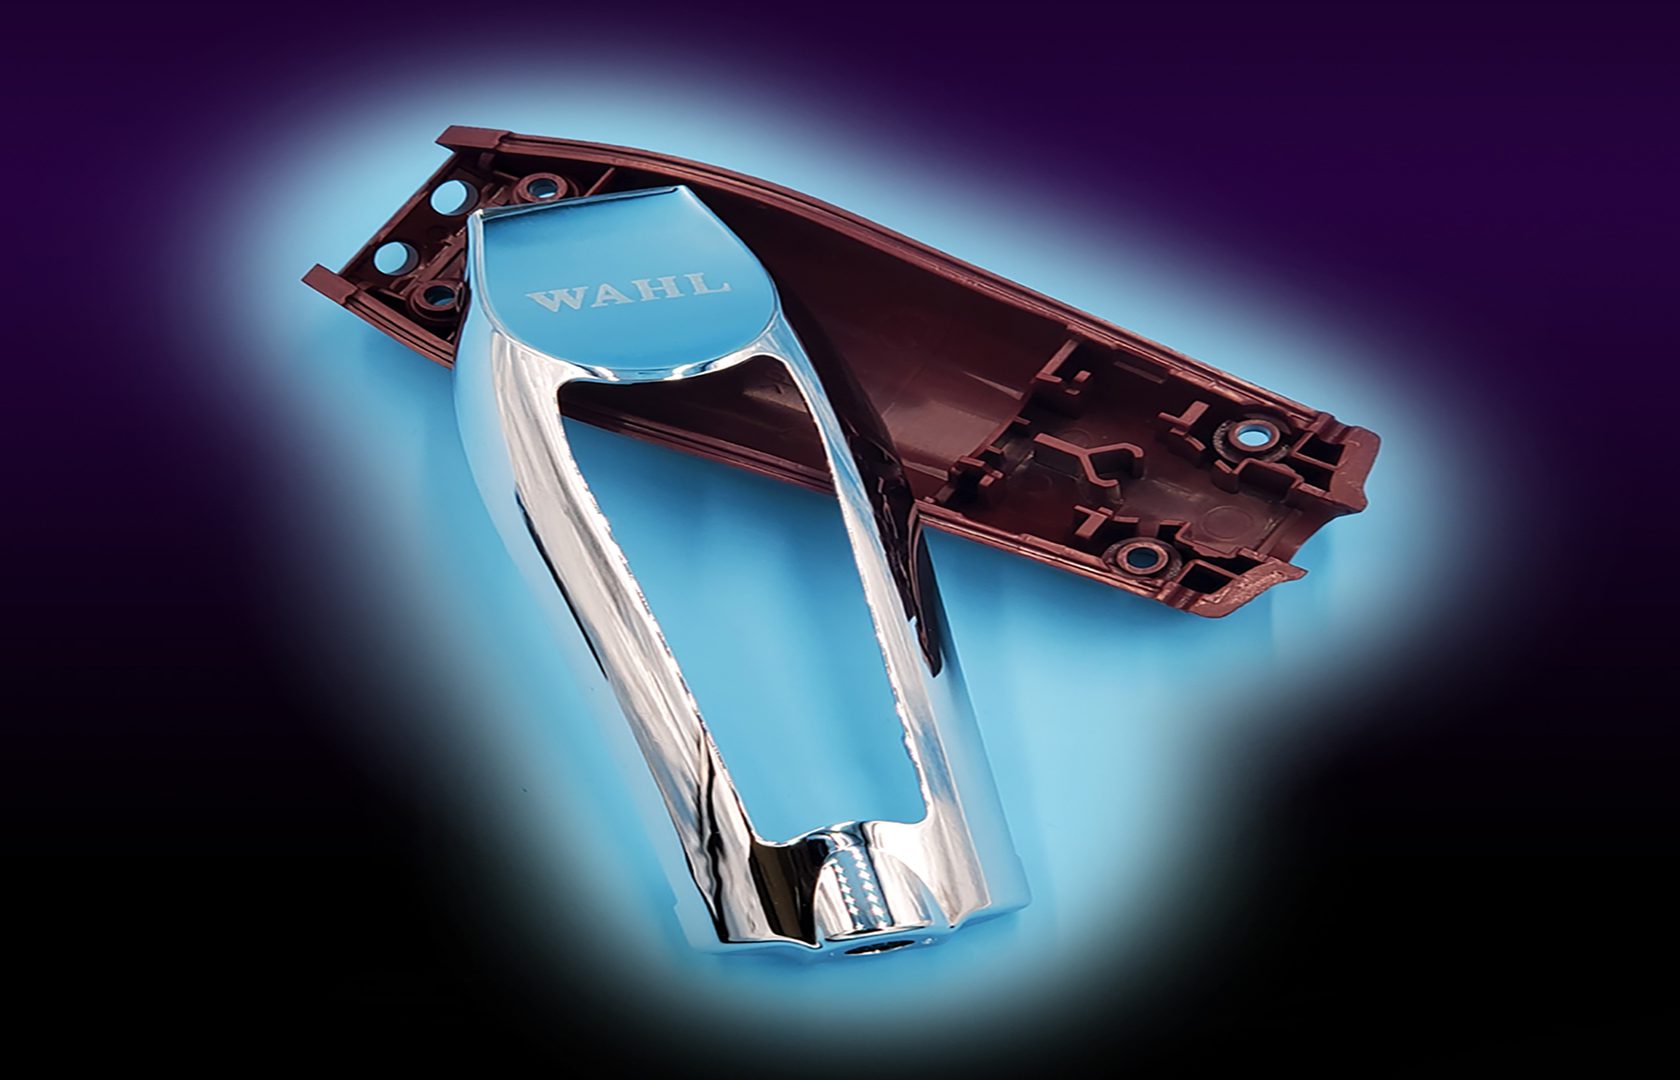 A chrome plated handle with a blue background